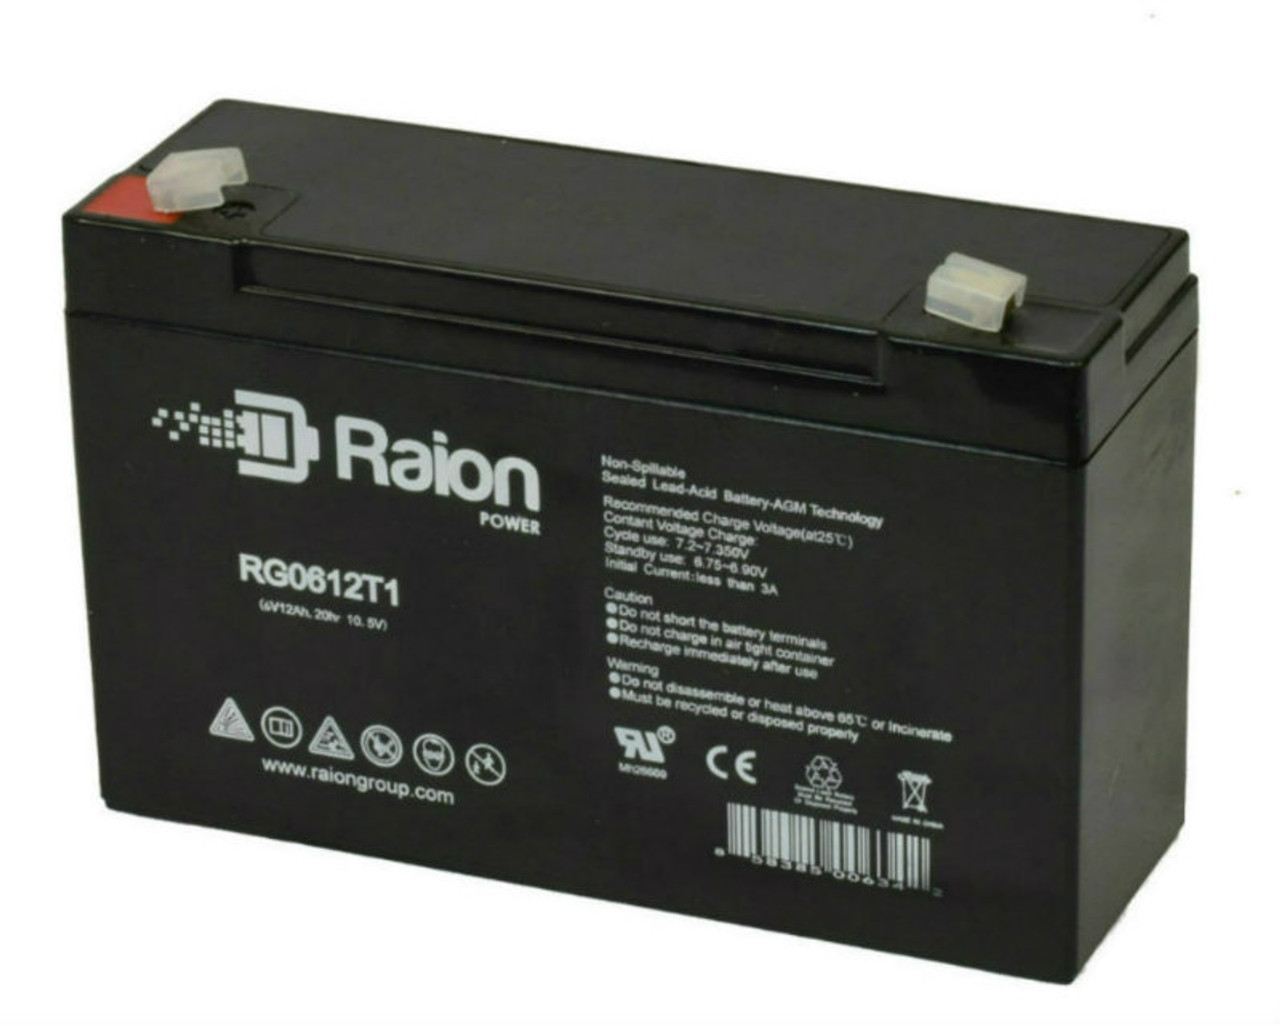 Raion Power RG06120T1 Replacement Battery for Streamlight SL33